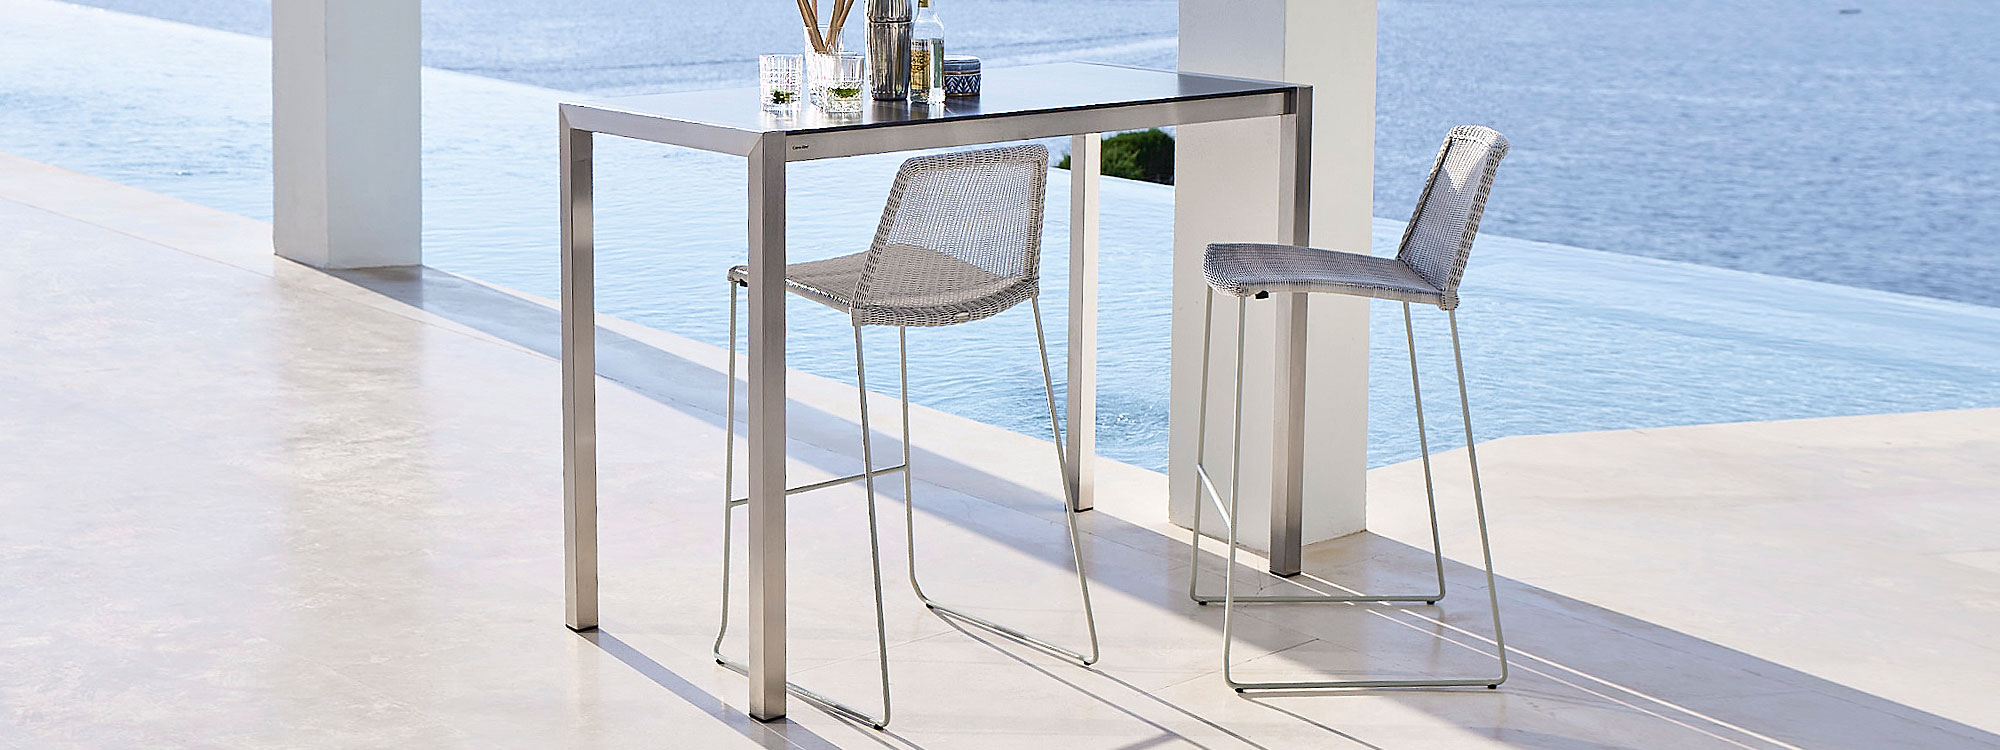 Image of Cane-line Drop bar table and Breeze outdoor bar stools in light grey